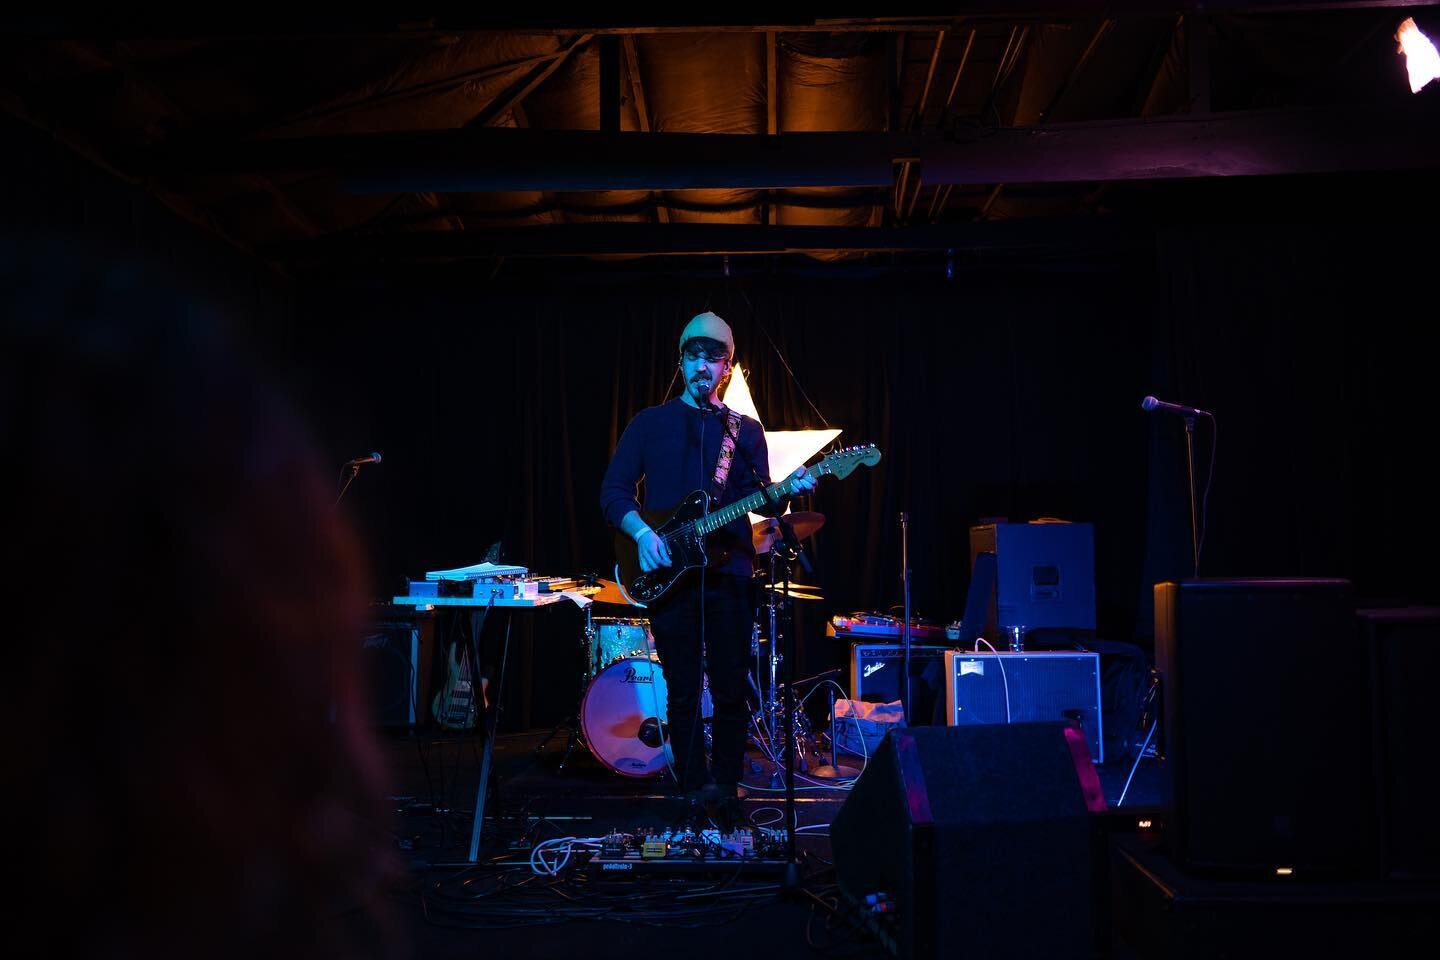 Ben had a lovey time playing solo at @opolispix with @baileyboy.mp3 and @katlockyall 
Thanks to everyone for coming out.
Now go get your tickets for our album release show! @resonant_head 
Link in bio
.
Pictures by the talented @benchofmirrors 📷